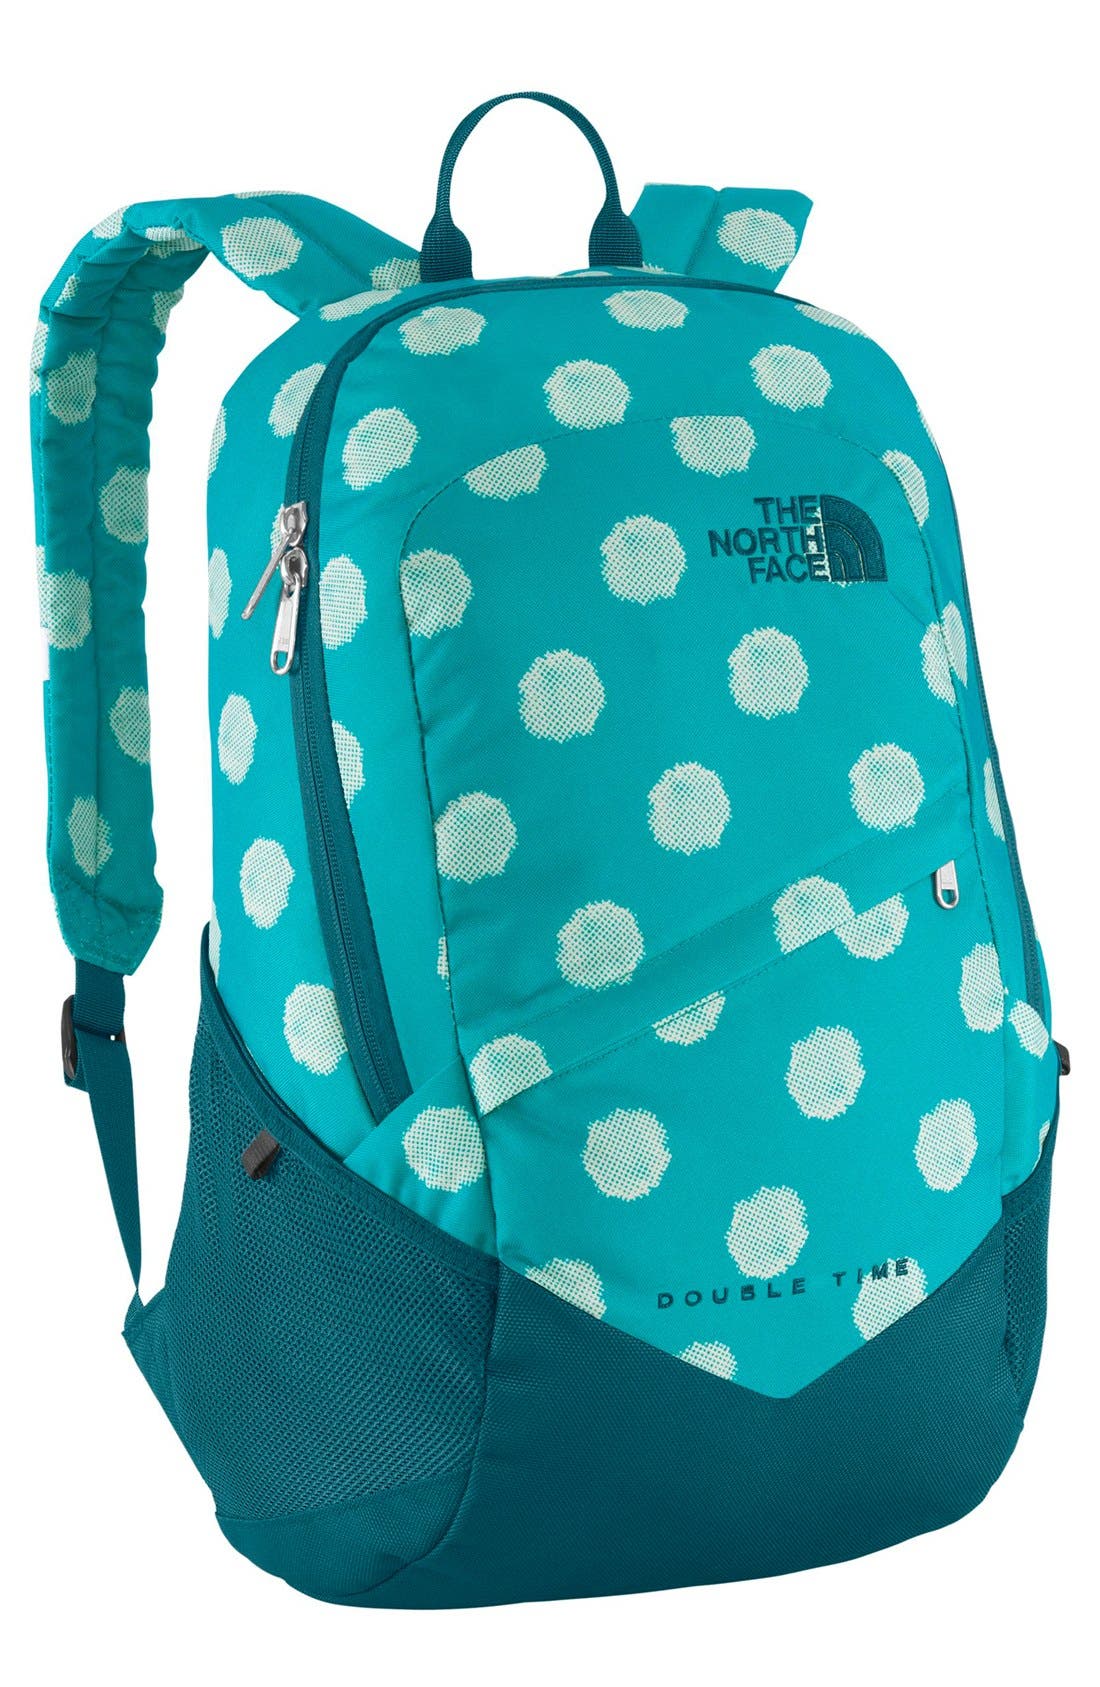 the north face double time backpack